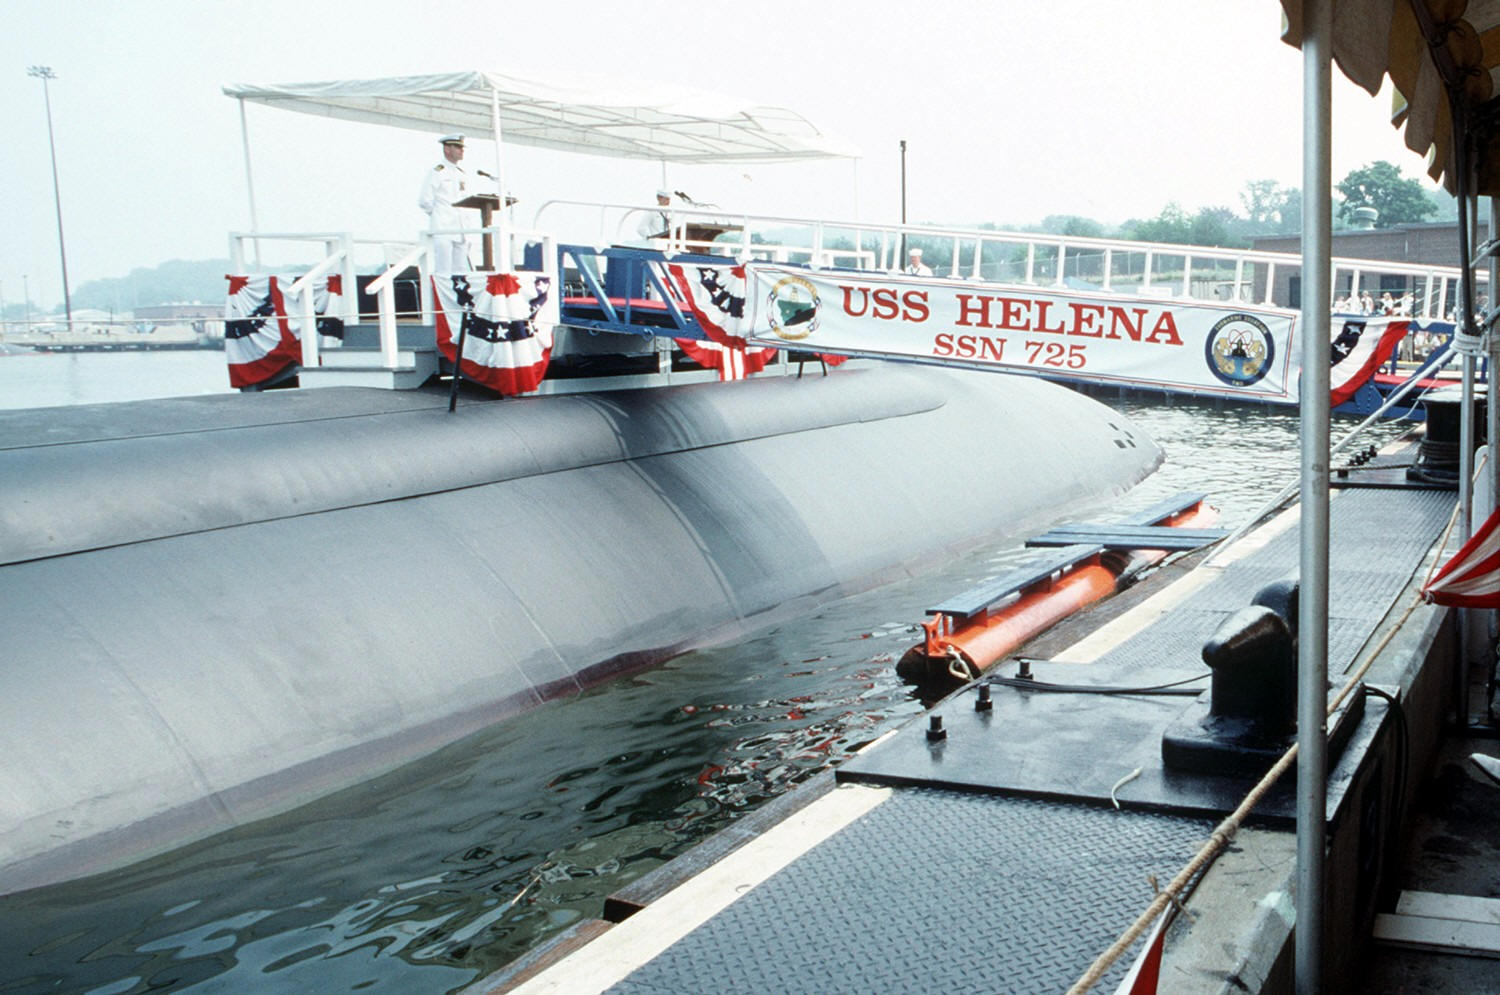 ssn-725 uss helena commissioning 1987